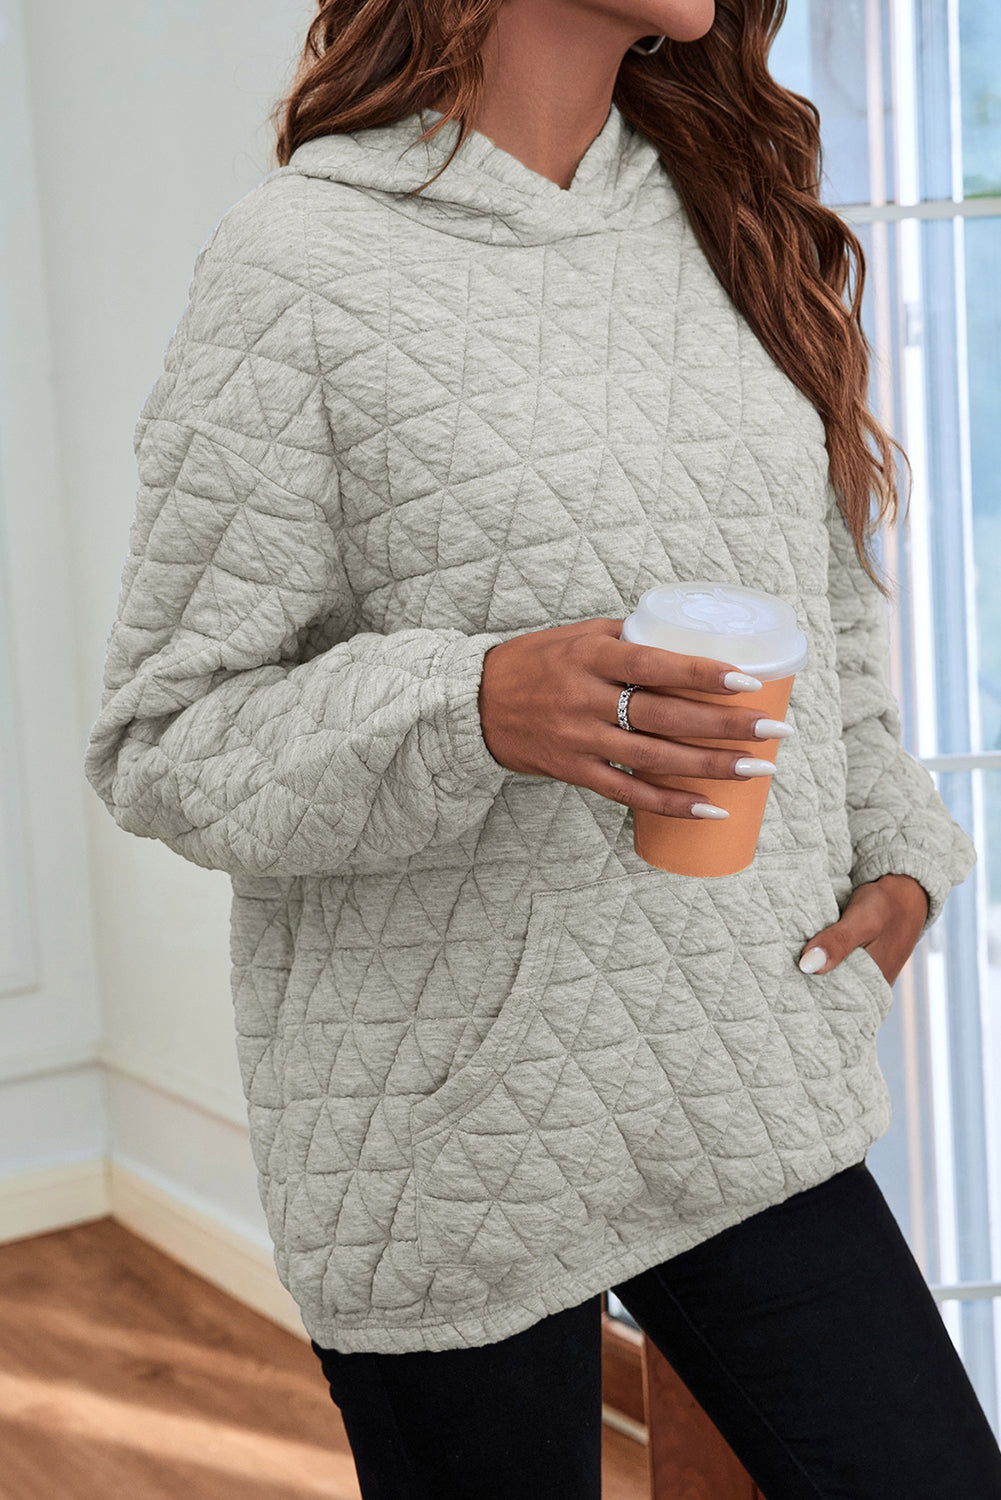 Light Grey/Hoodie 95%Polyester+5%Elastane - Solid Quilted Pullover and Pants Outfit Set, Shirt, or Hoodie- various colors - womens pants set at TFC&H Co.